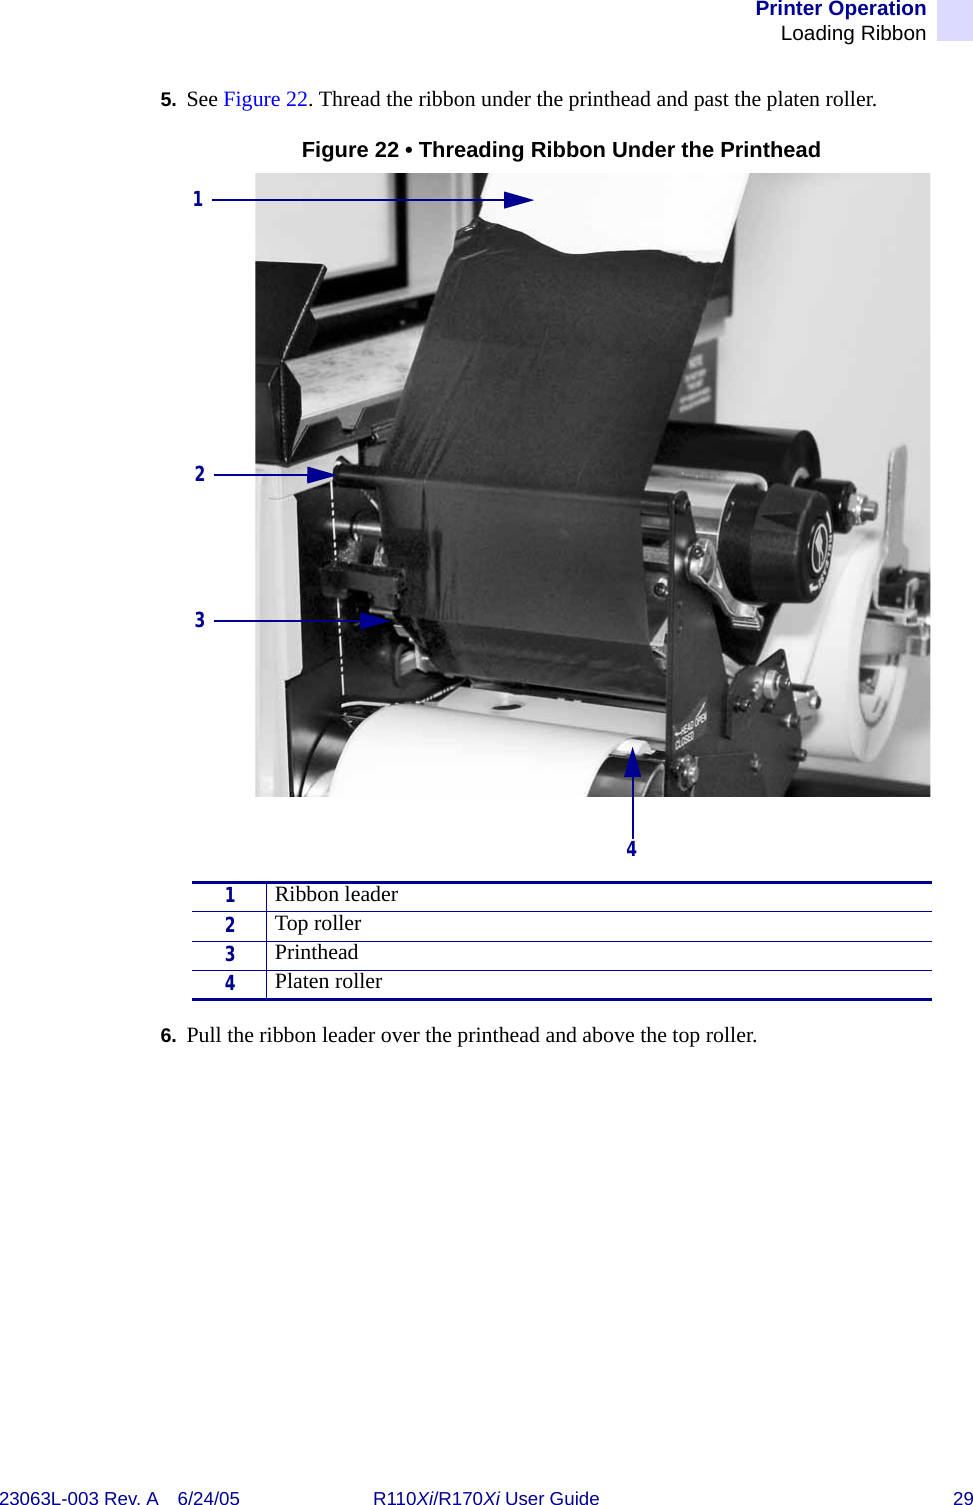 Printer OperationLoading Ribbon23063L-003 Rev. A 6/24/05 R110Xi/R170Xi User Guide 295. See Figure 22. Thread the ribbon under the printhead and past the platen roller. Figure 22 • Threading Ribbon Under the Printhead6. Pull the ribbon leader over the printhead and above the top roller.1Ribbon leader2Top roller3Printhead4Platen roller2314